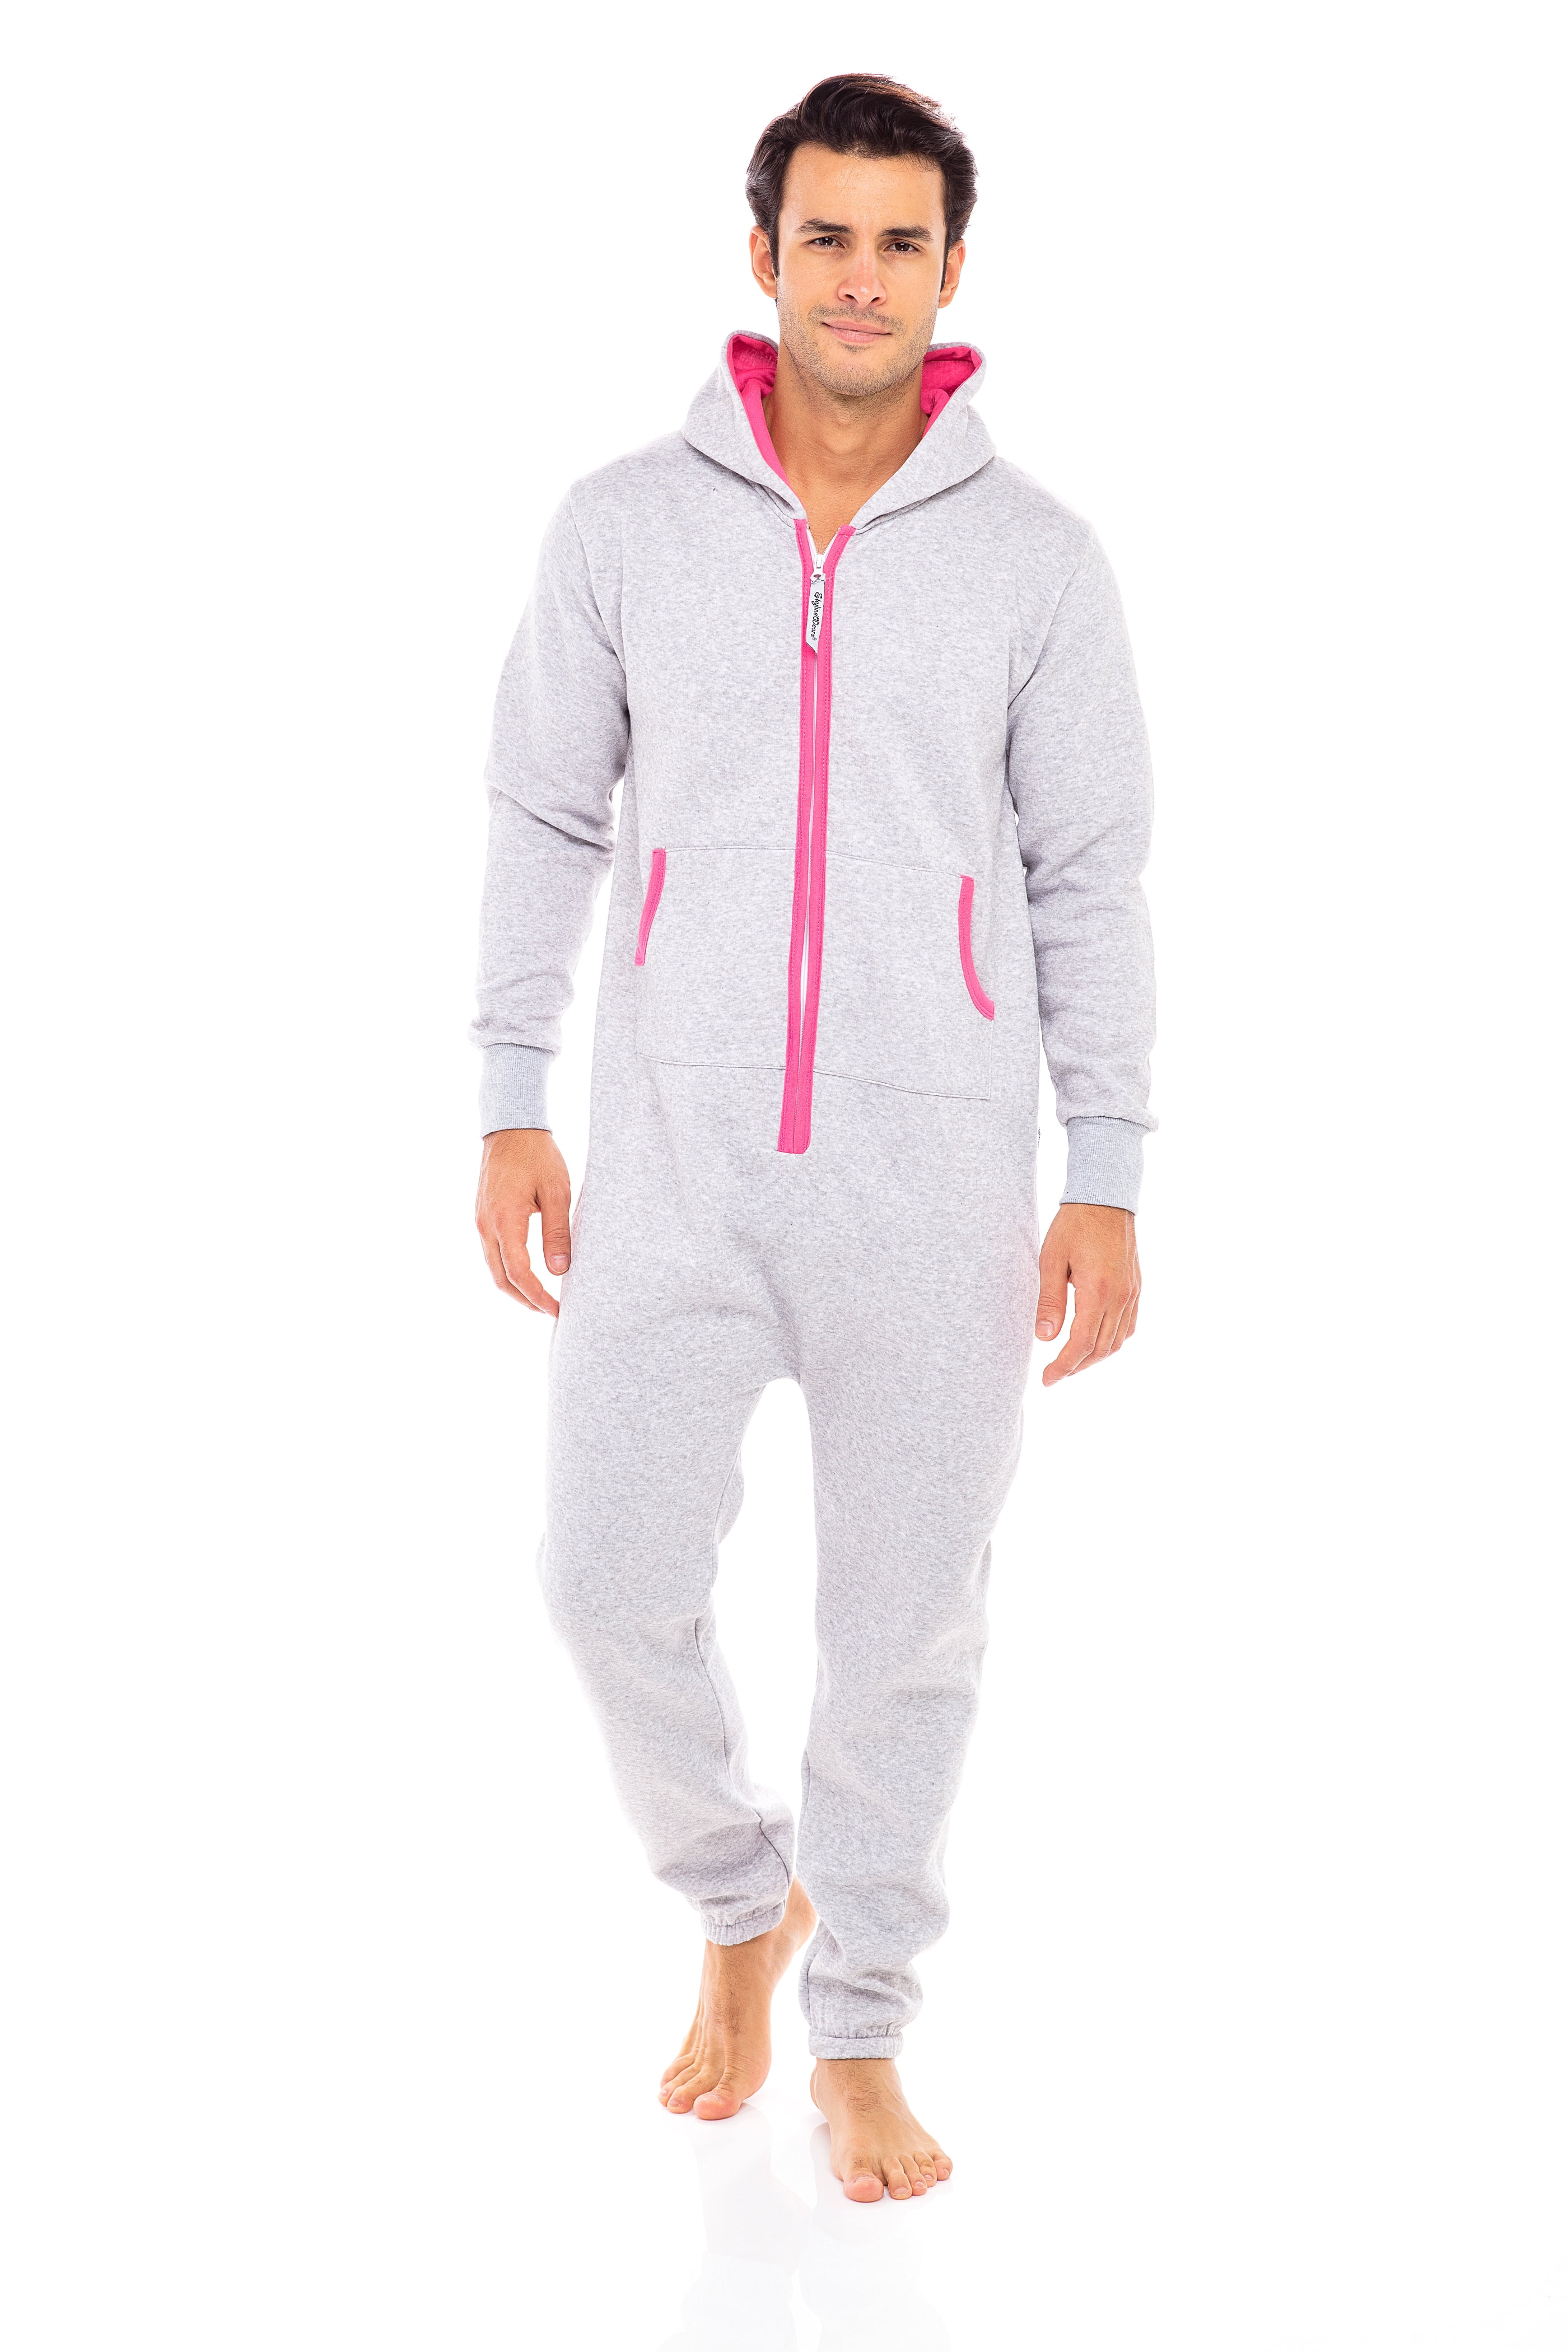 Mens Jumpsuit Non Footed Pajama Unisex One Piece Playsuit Adult Onesie With Hood 